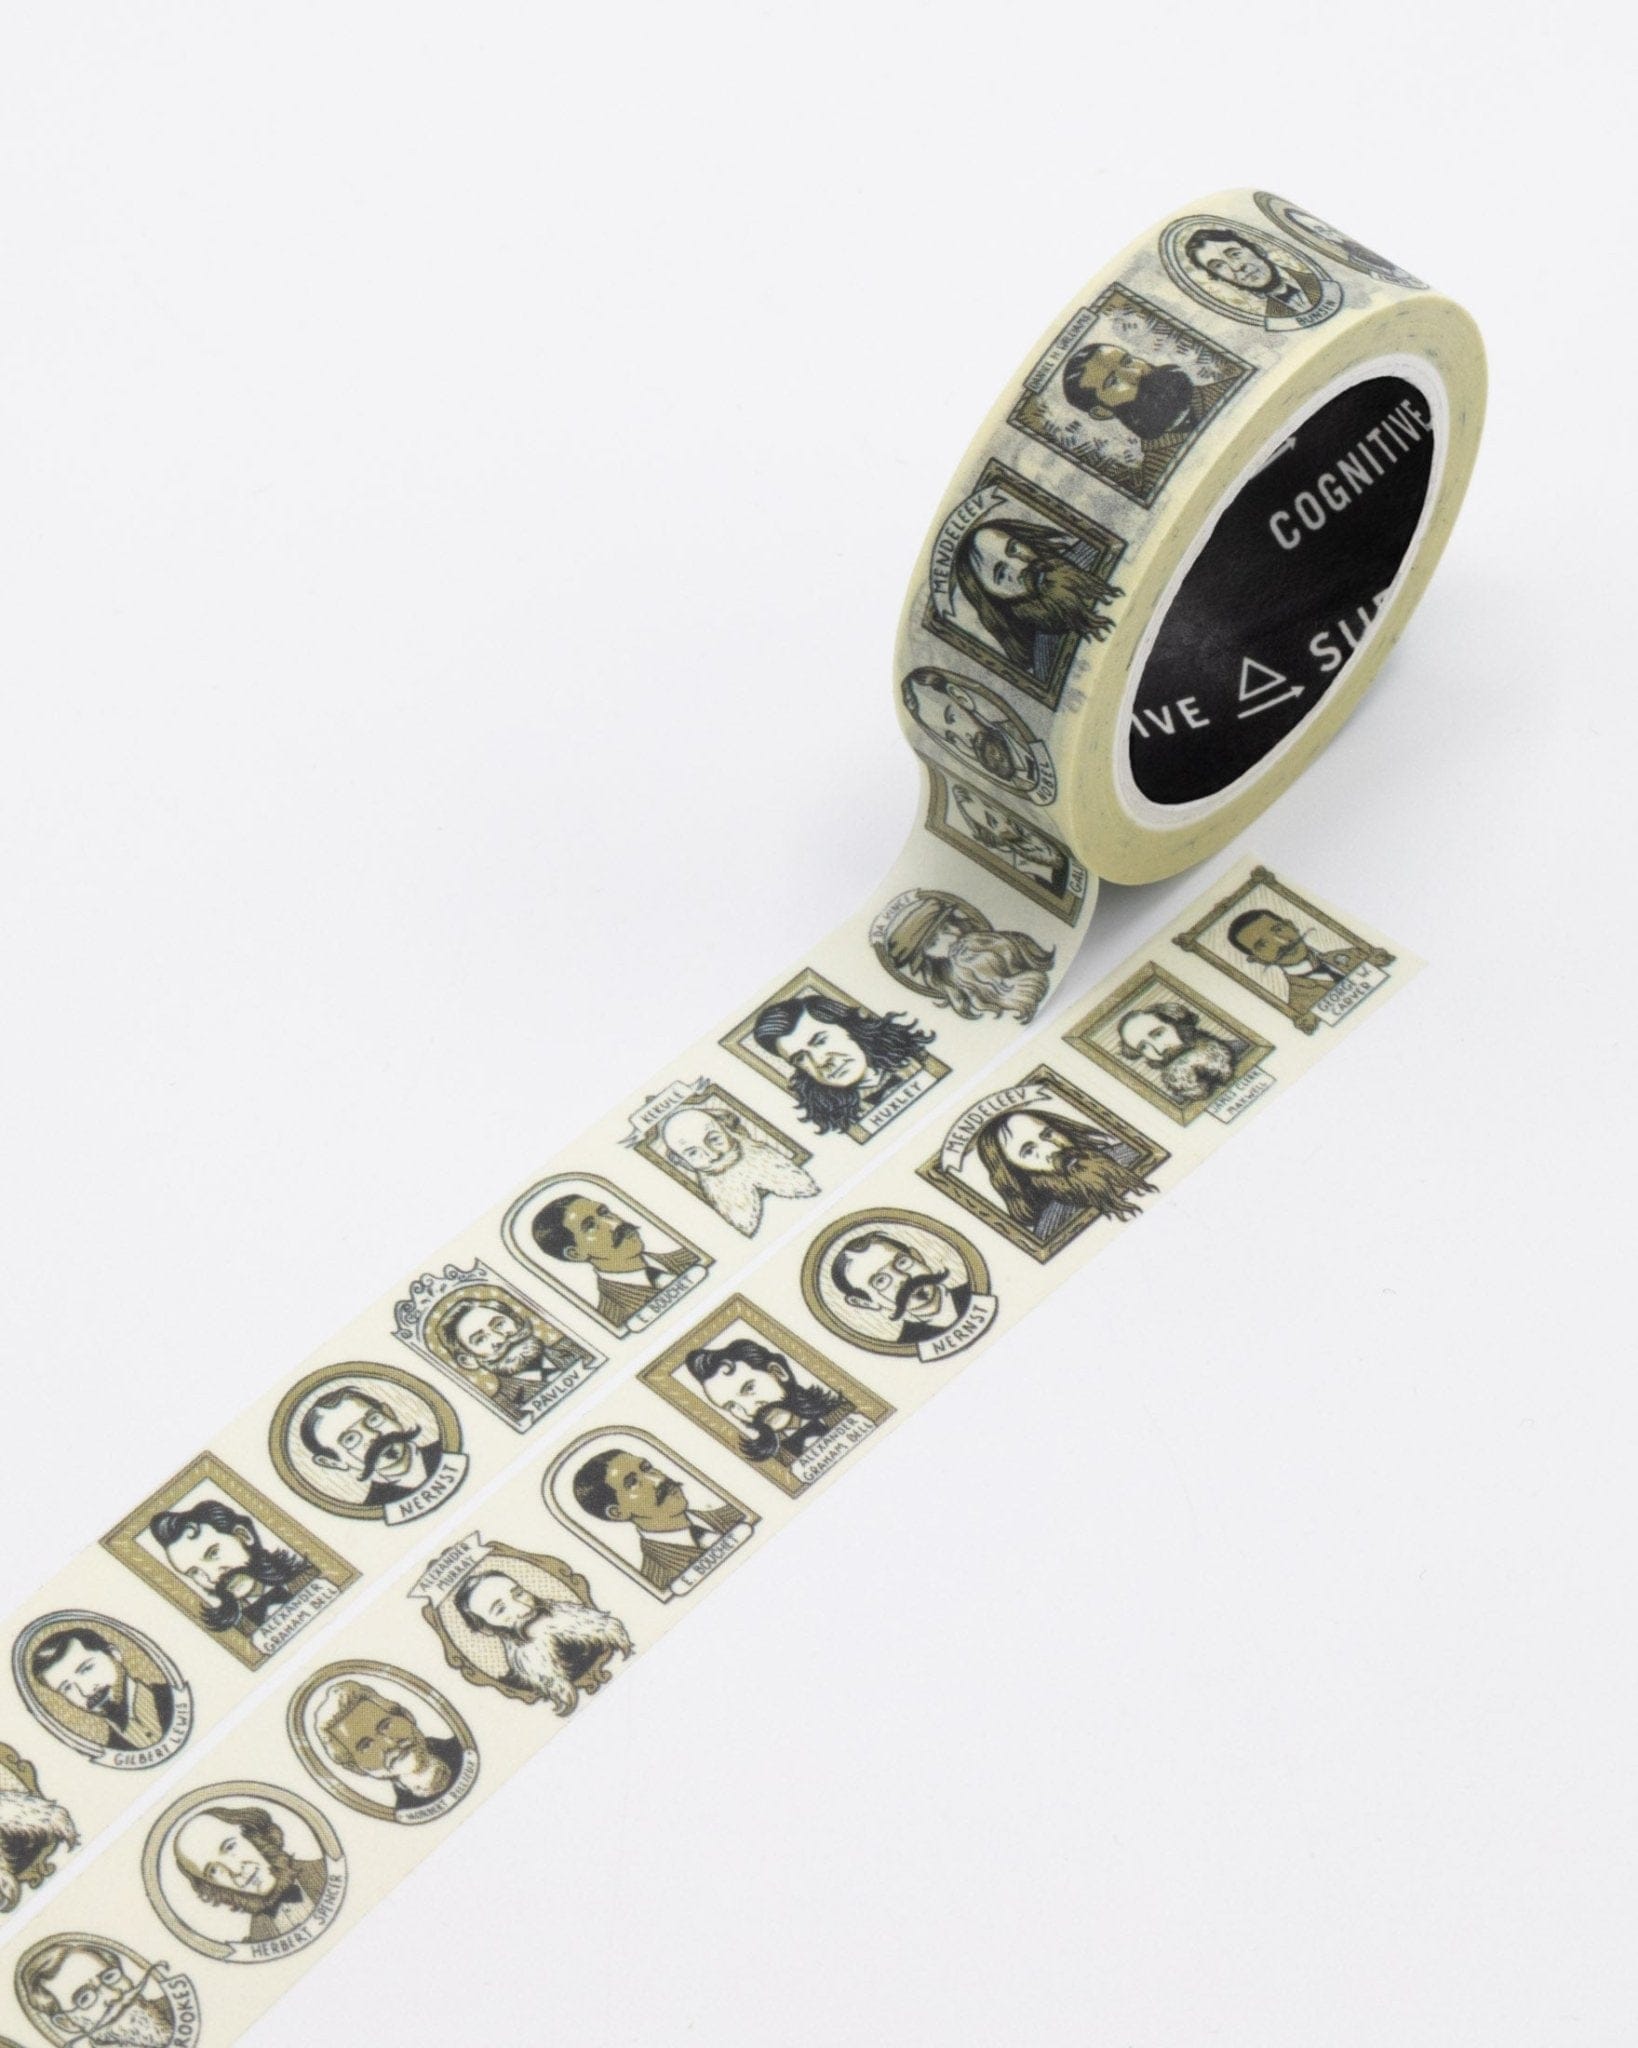 Great Beards of Science Washi Tape Cognitive Surplus